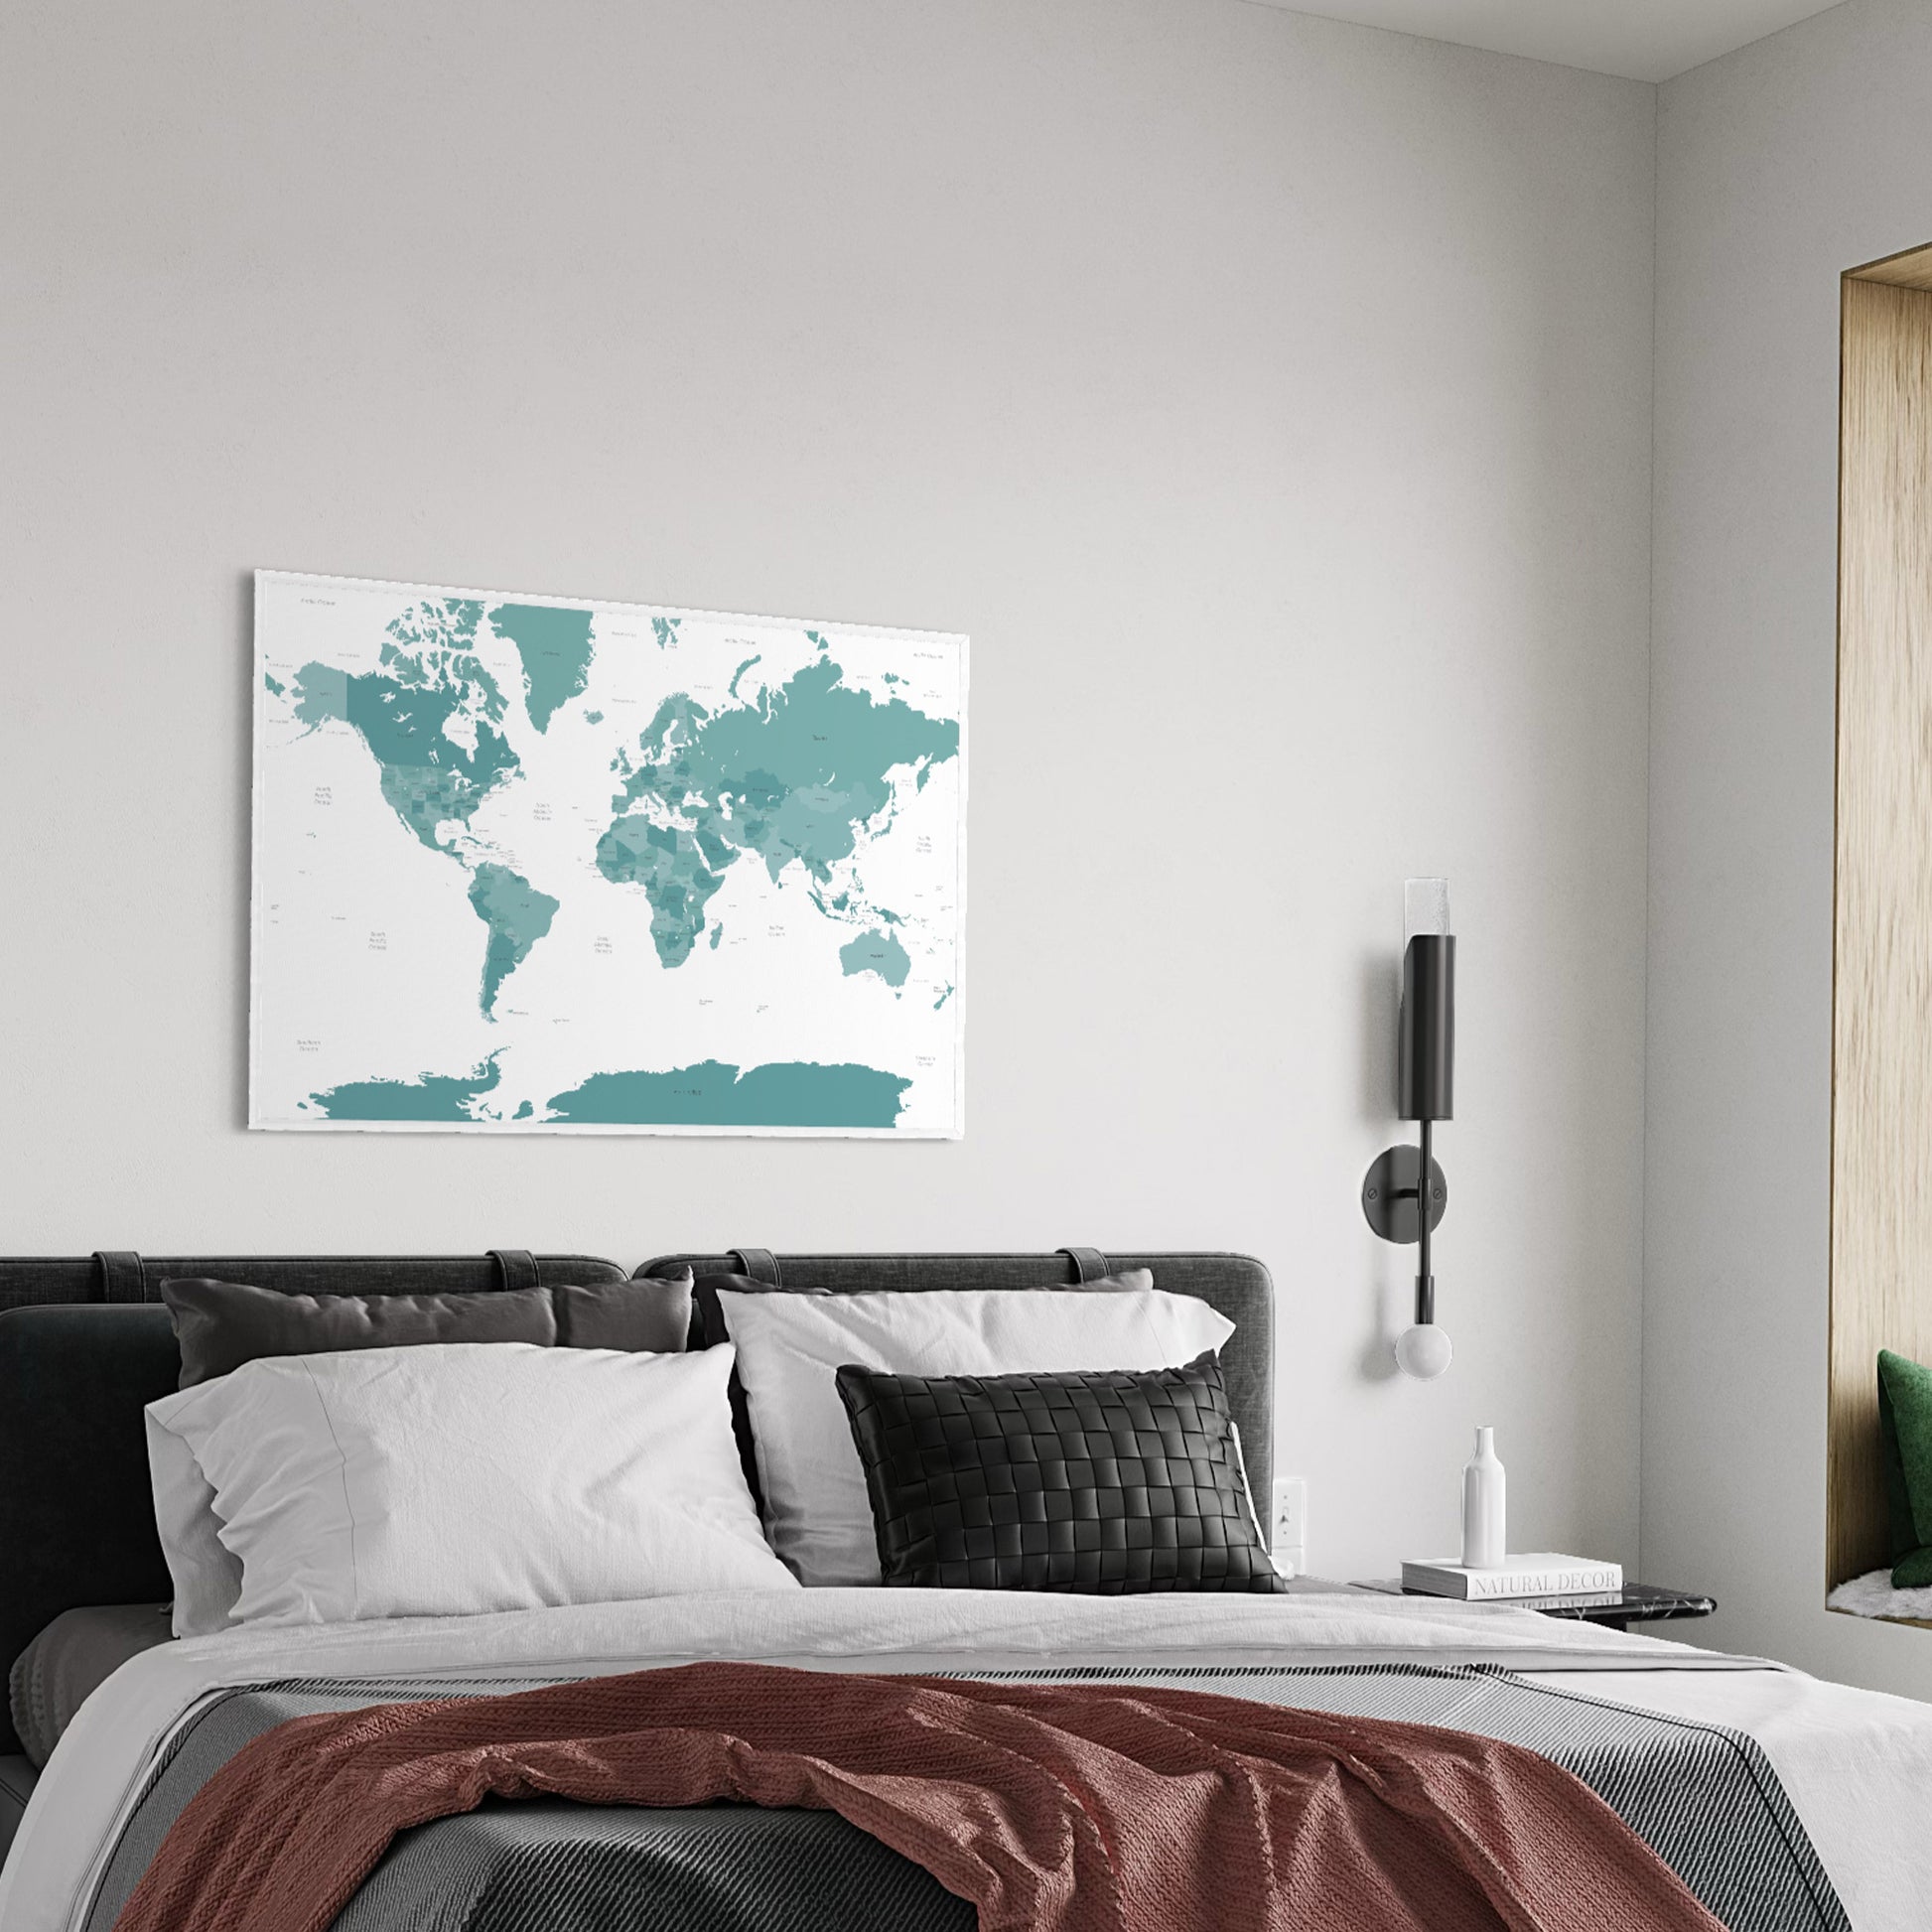 Teal Worl Map Above Bed in Modern Bedroom